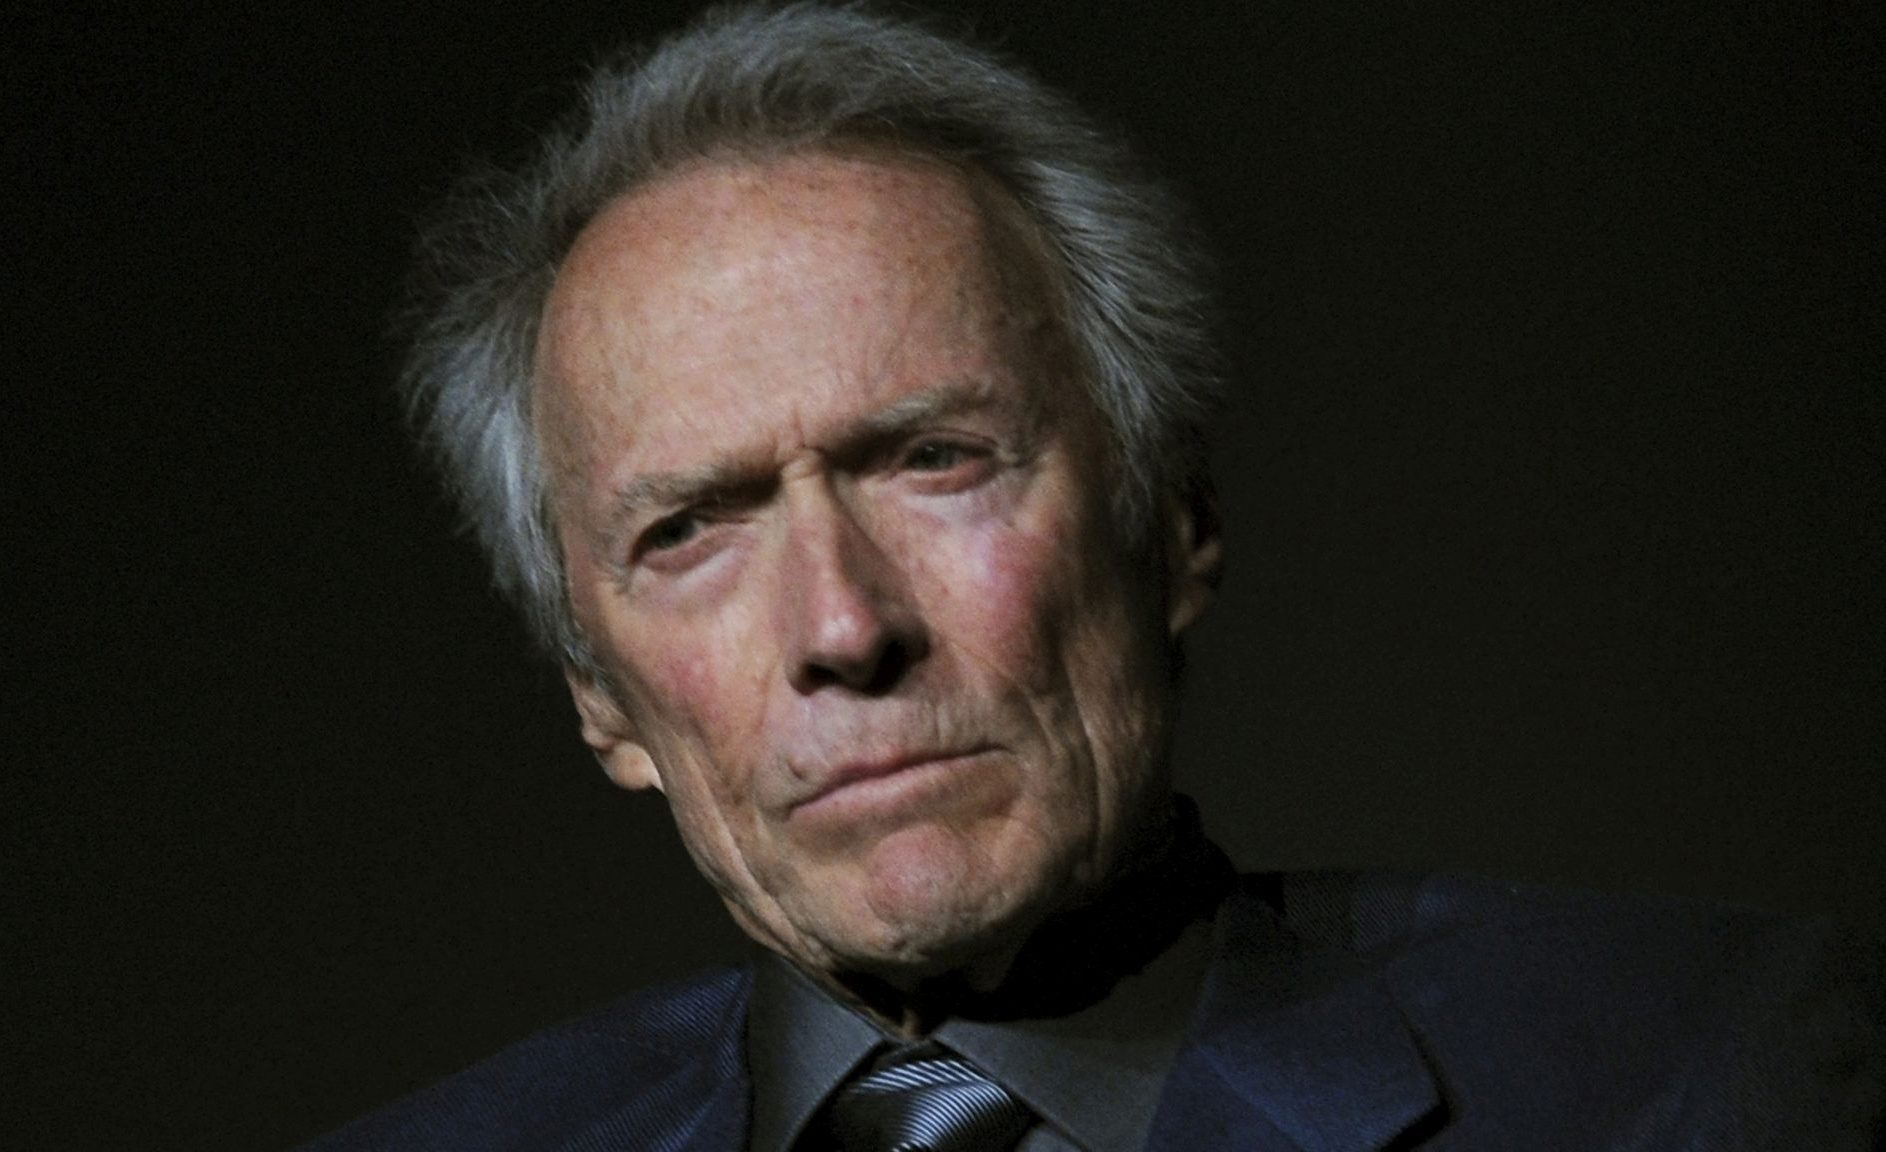 epa04764885 (FILE) A picture dated 27 April 2013 shows US actor/director, Clint Eastwood attending at the Tibeca Talks, Director's Series at the 2013 Tribeca Film Festival in New York, New York USA. Eastwood will turn 85 years of age on 31 May 2015.  EPA/PETER FOLEY